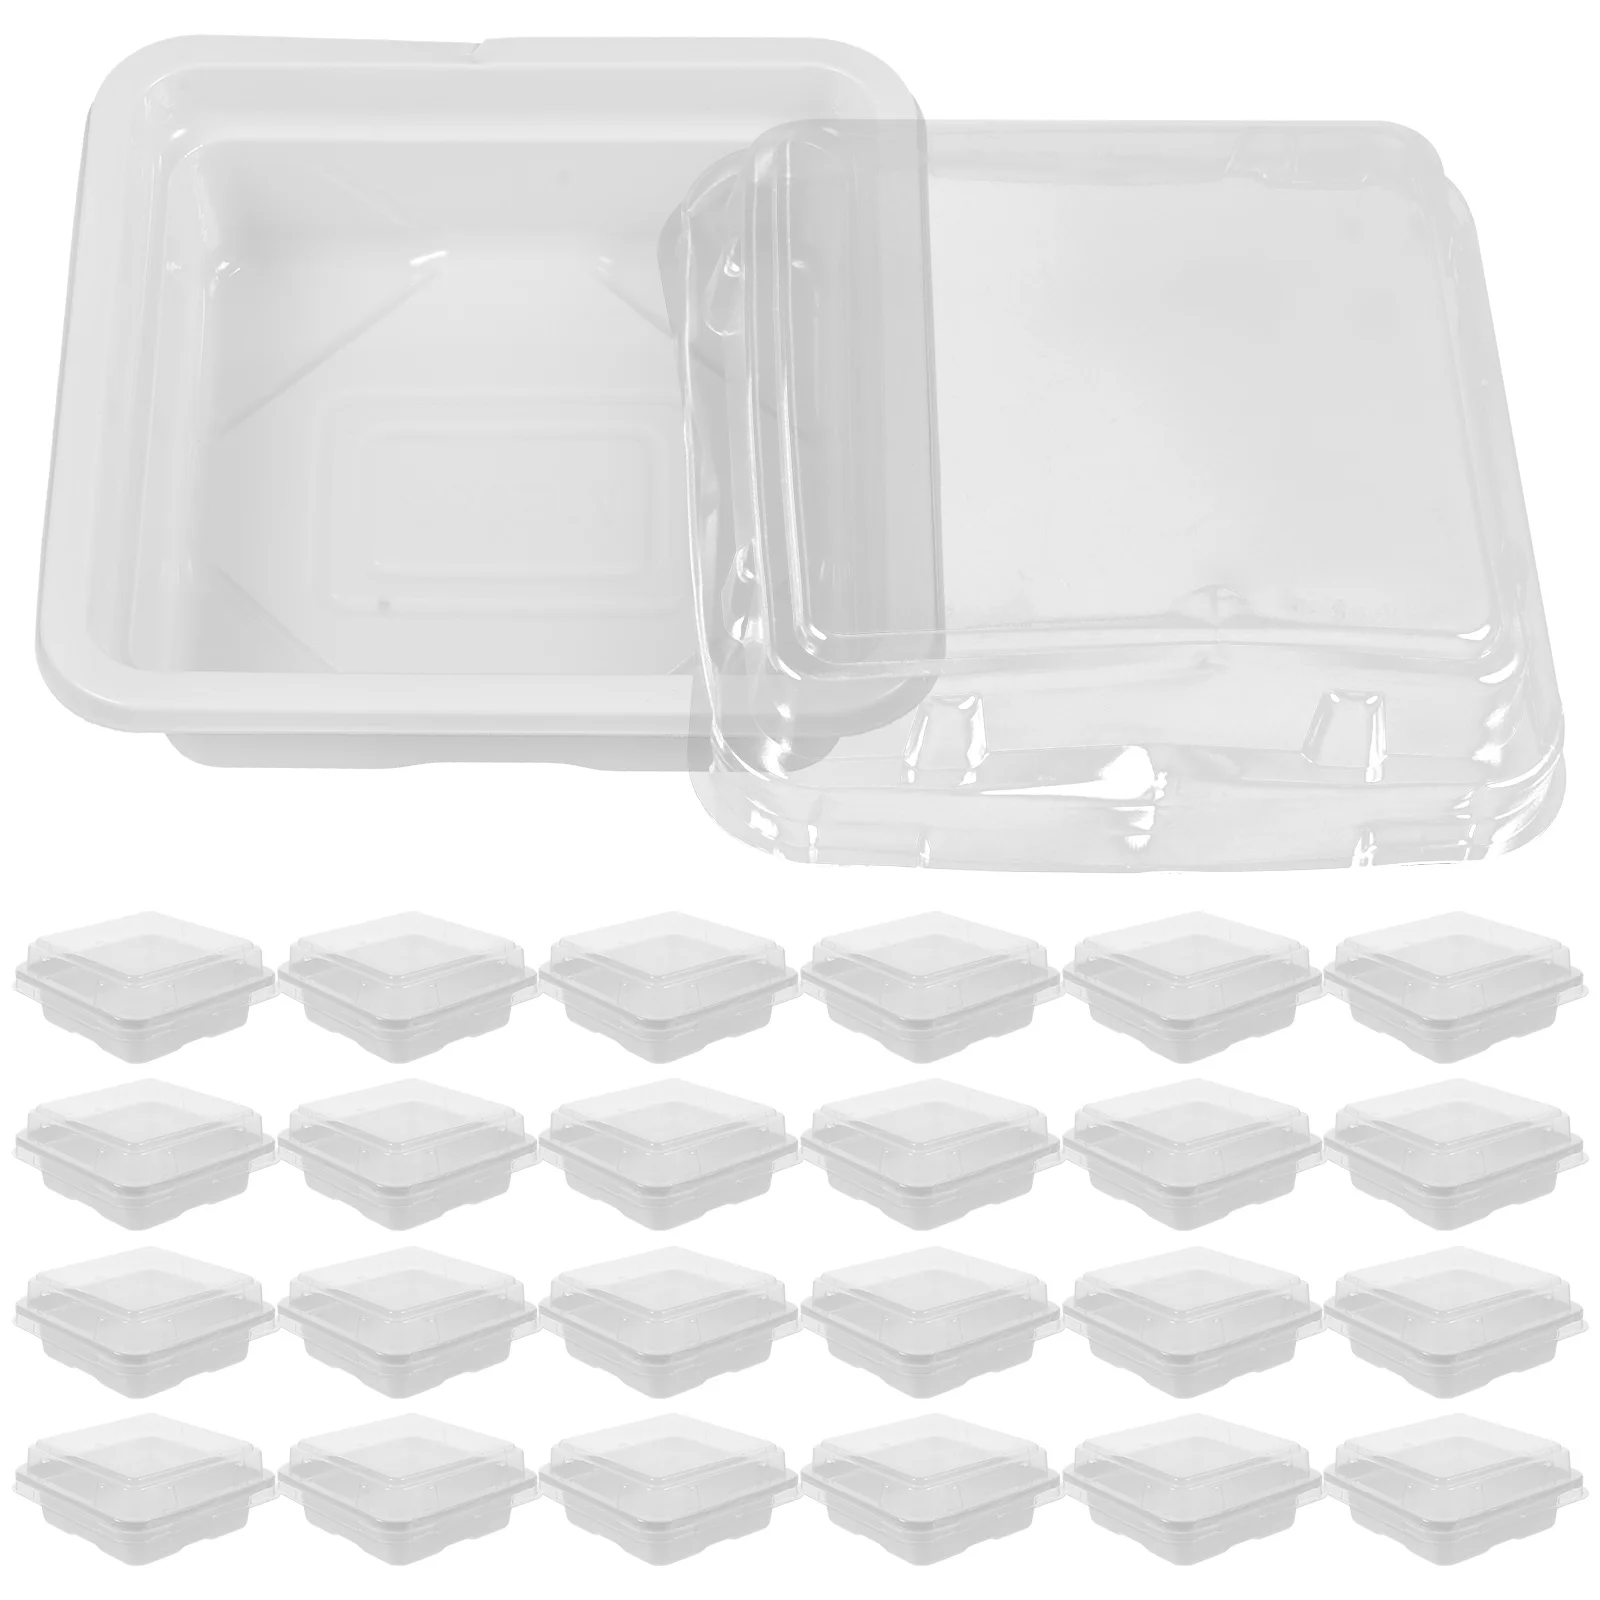 

50 Pcs Sandwich Box Square Cake Holder Containers Food Carrier Packing Portable Stand Birthday Clear Pastry